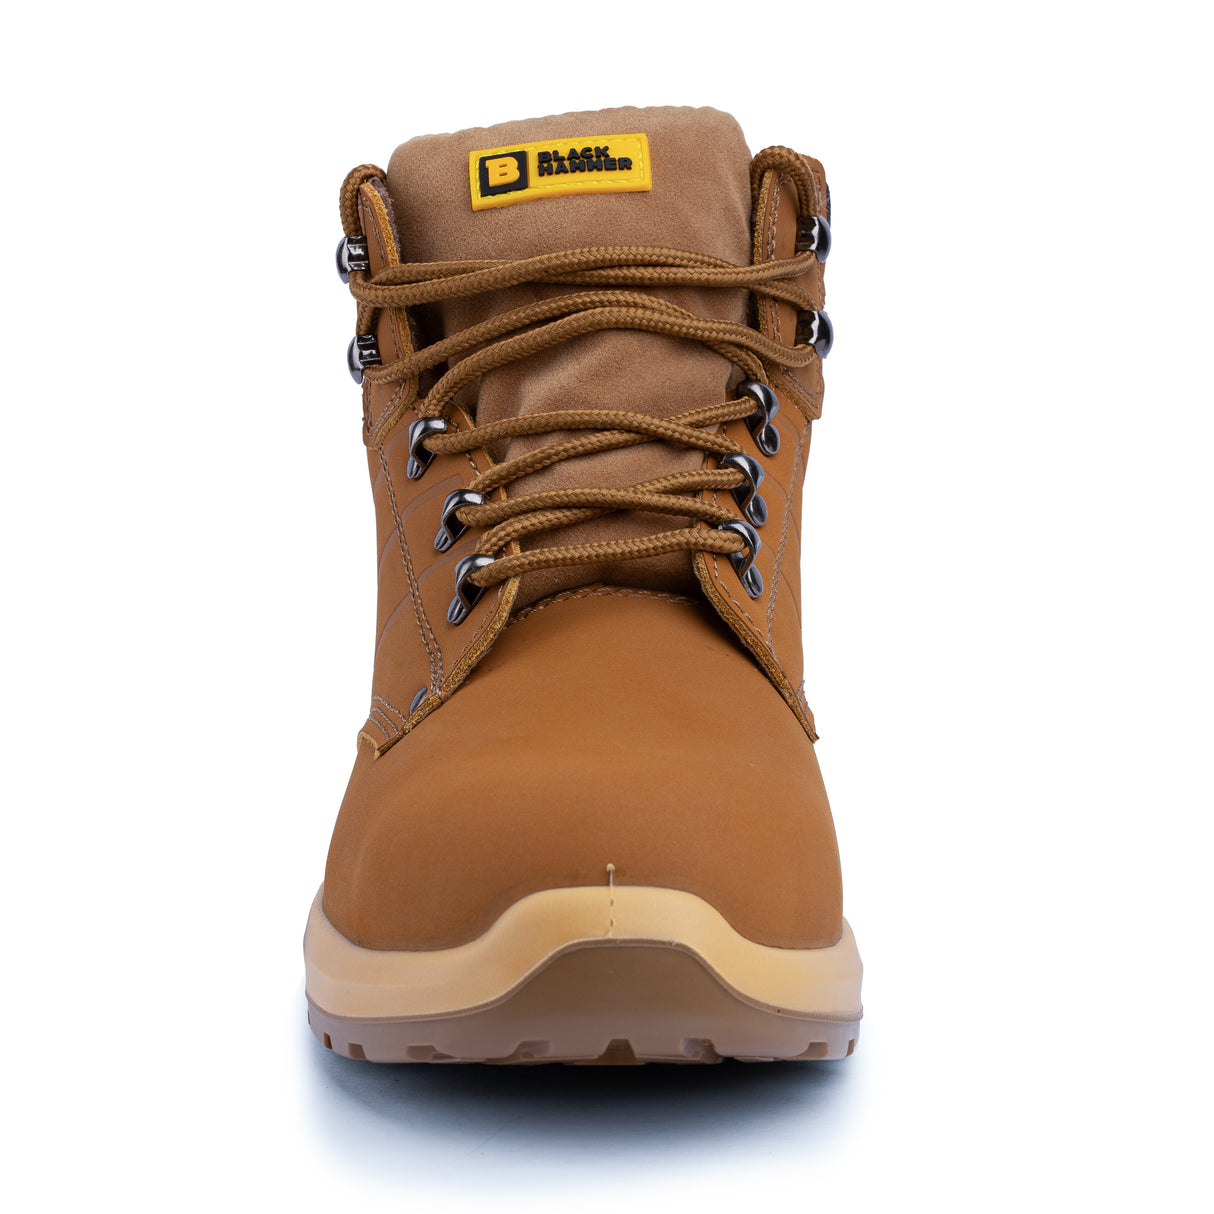 Steel Toe Cap Safety Boots 